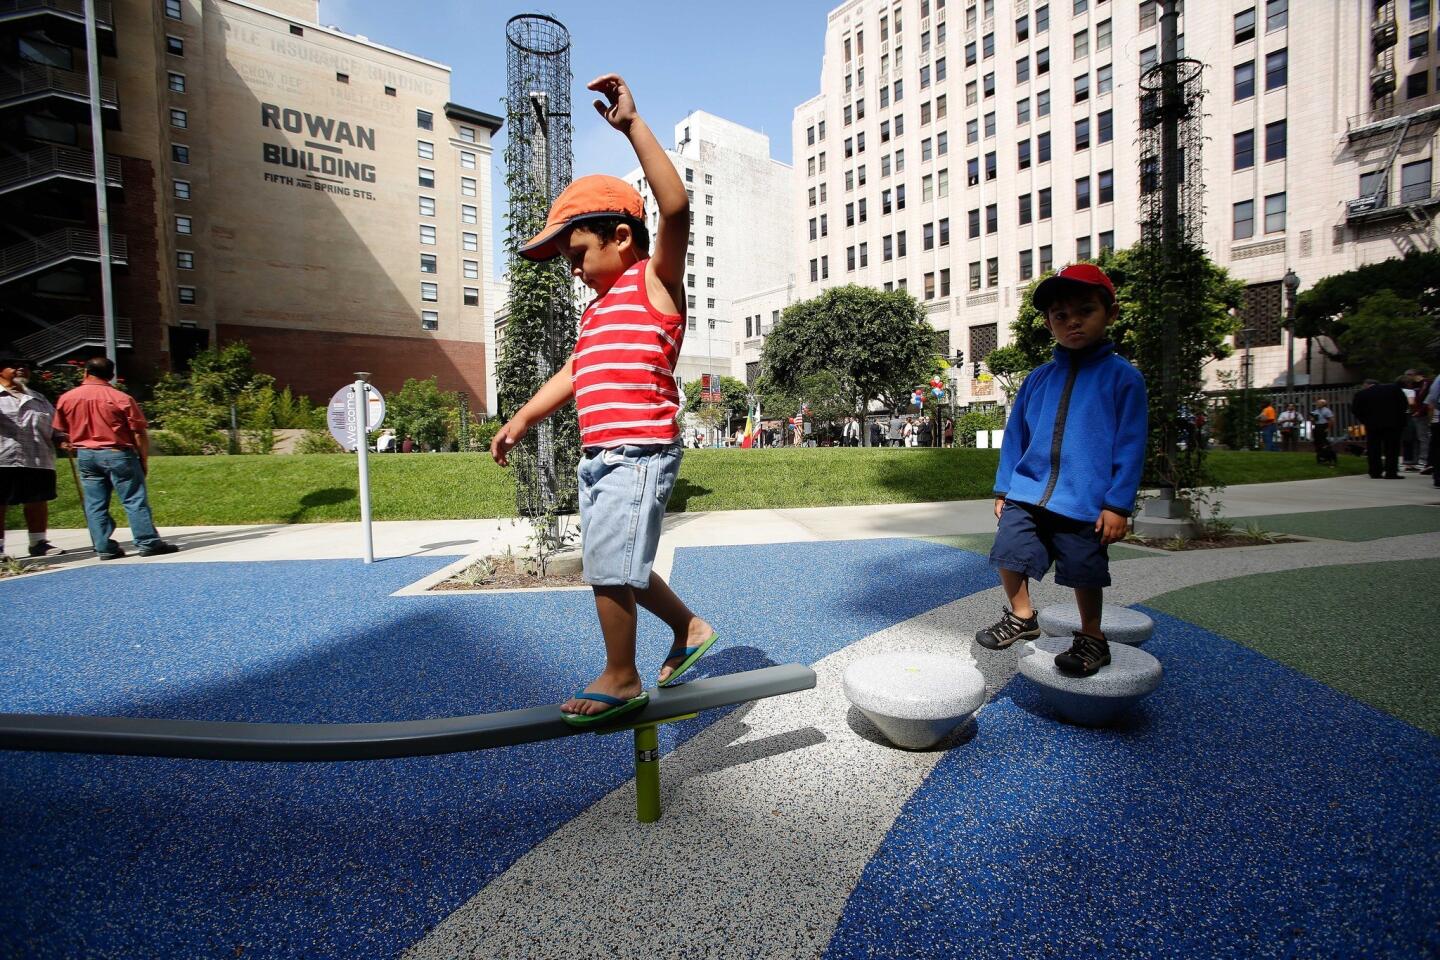 Matteo Walters, 4, left, keeps his balance while playing in the park with his brother Angelo, 3, right. The park, which is roughly 2/3 of an acre, sits atop a former parking lot between 4th and 5th streets.